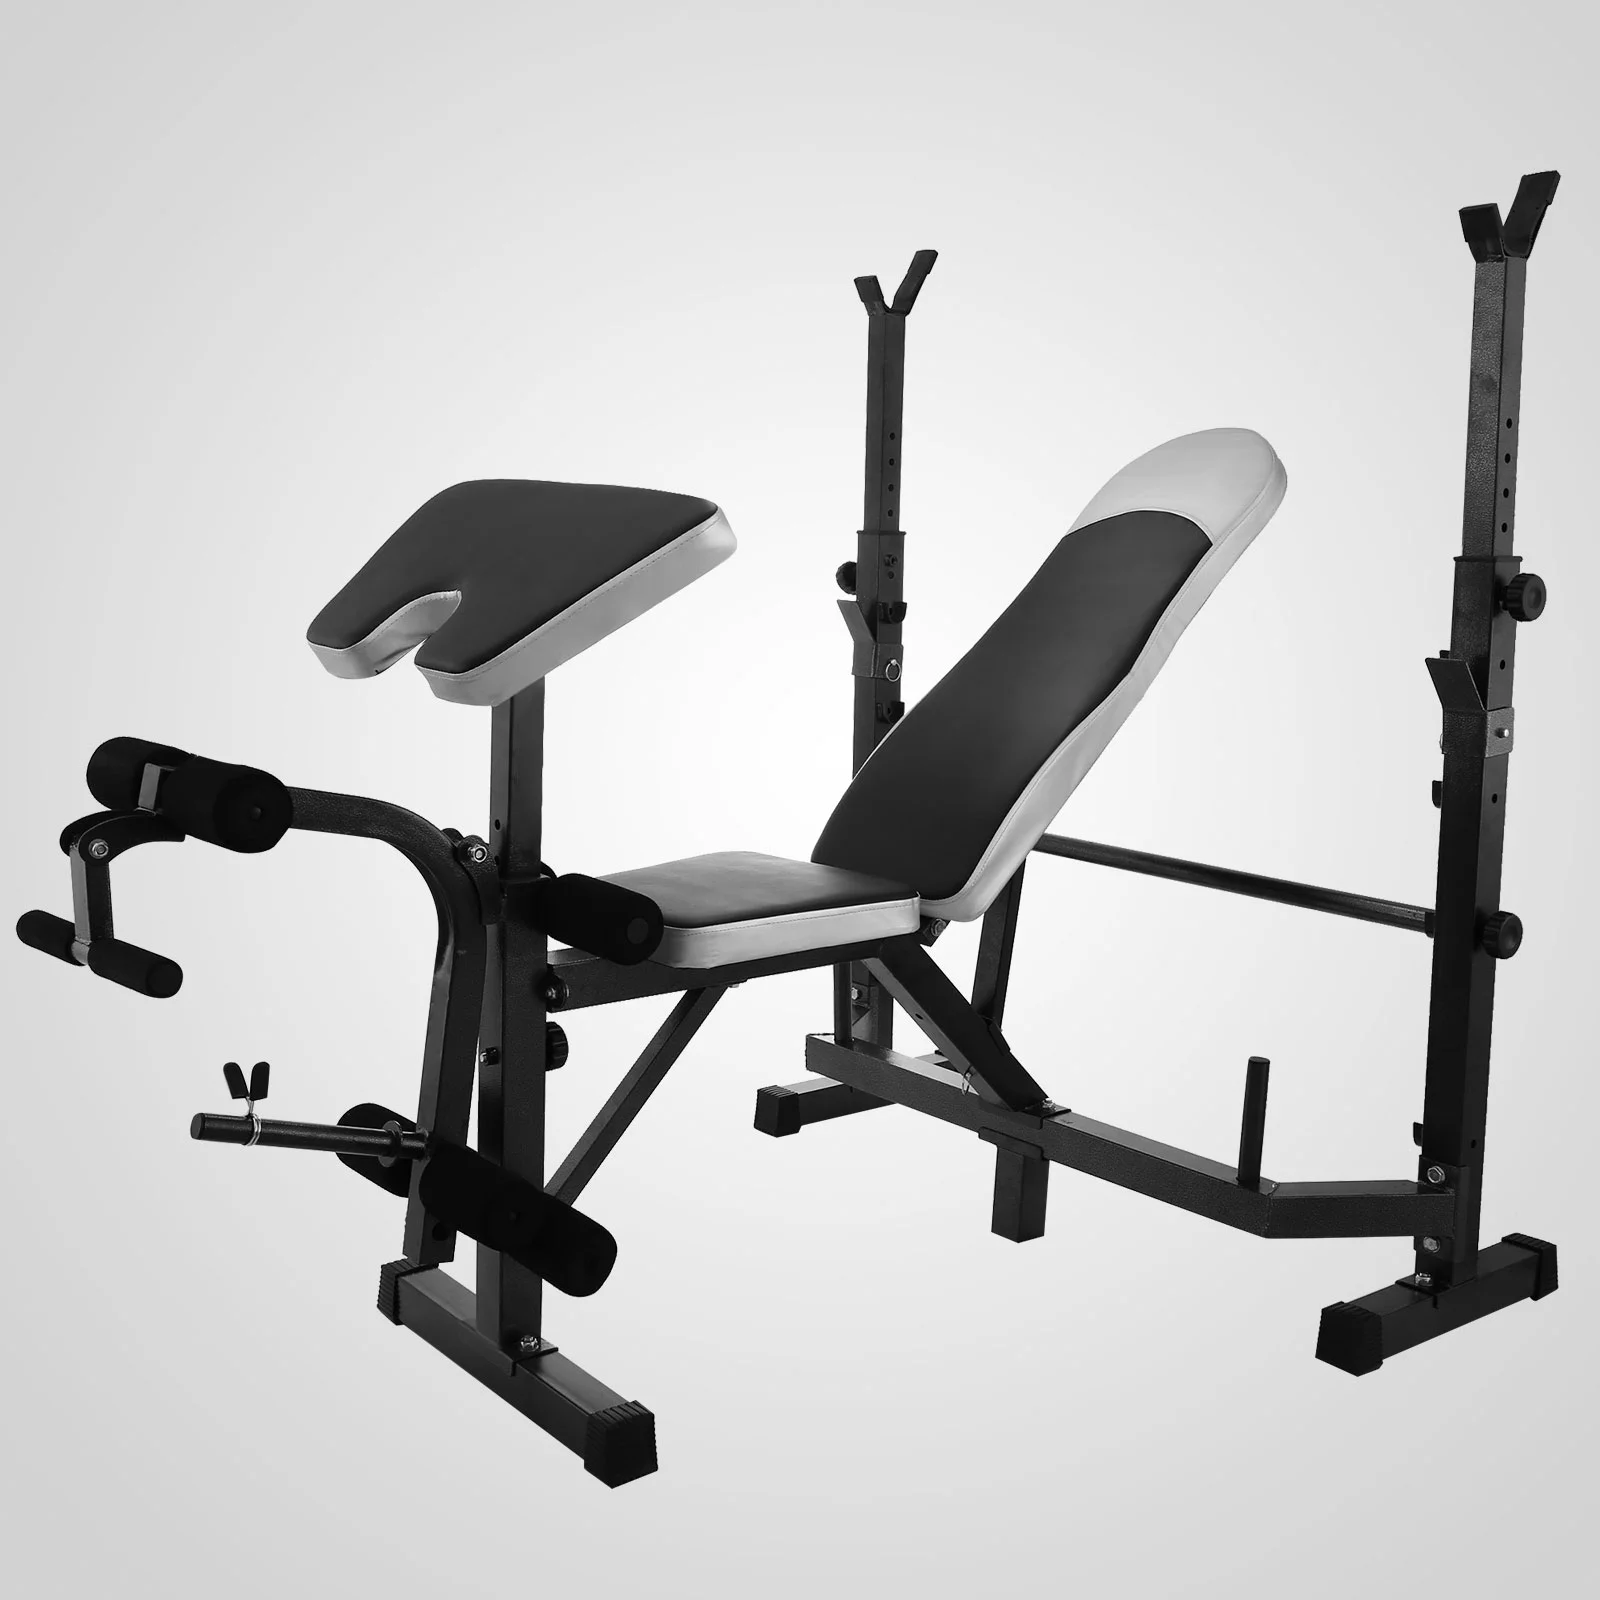 Commercial Free Weight Lifting Super Bench Buy Great Weight Bench